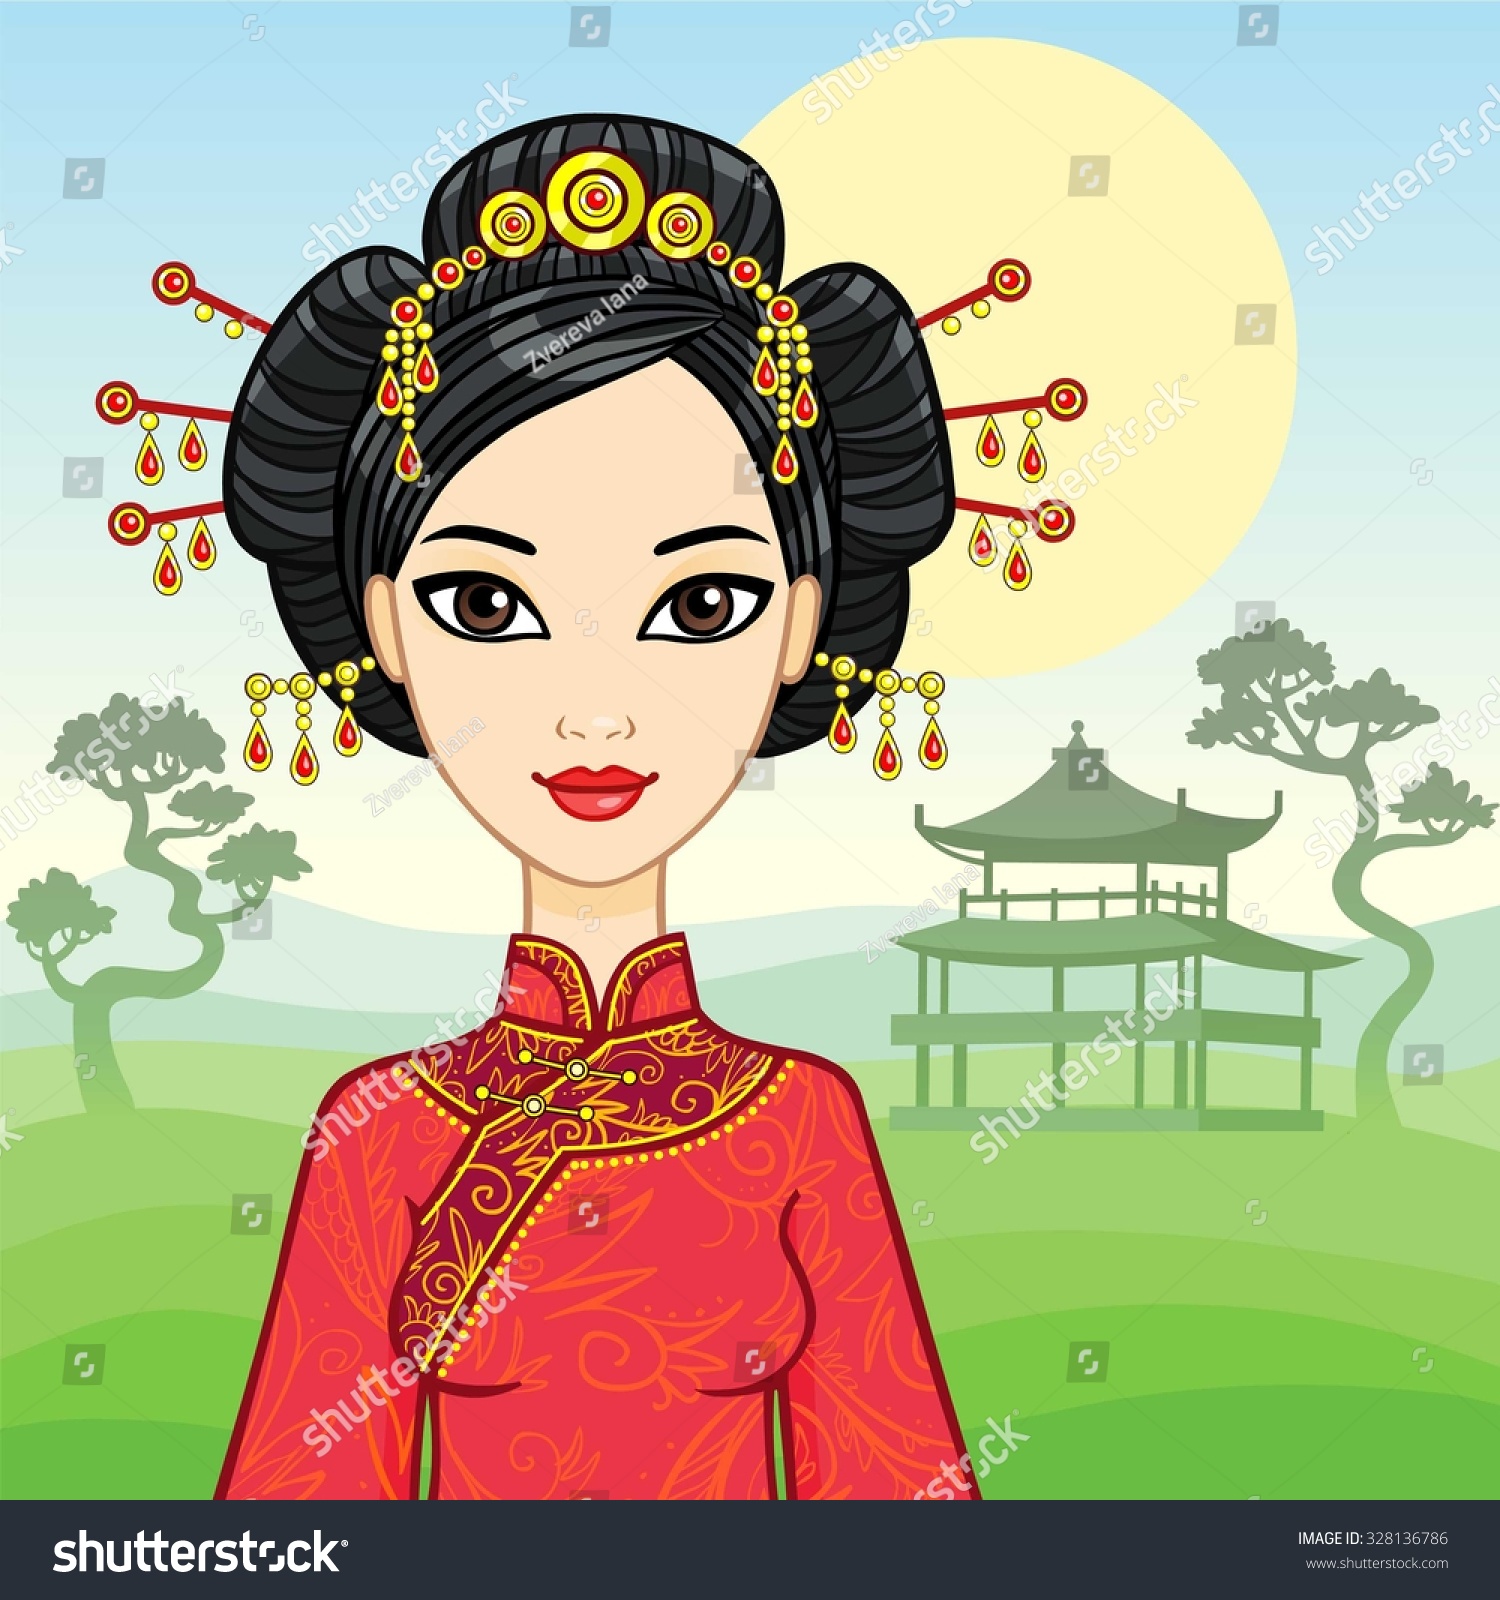 Chinese clipart vector. Woman free collection download